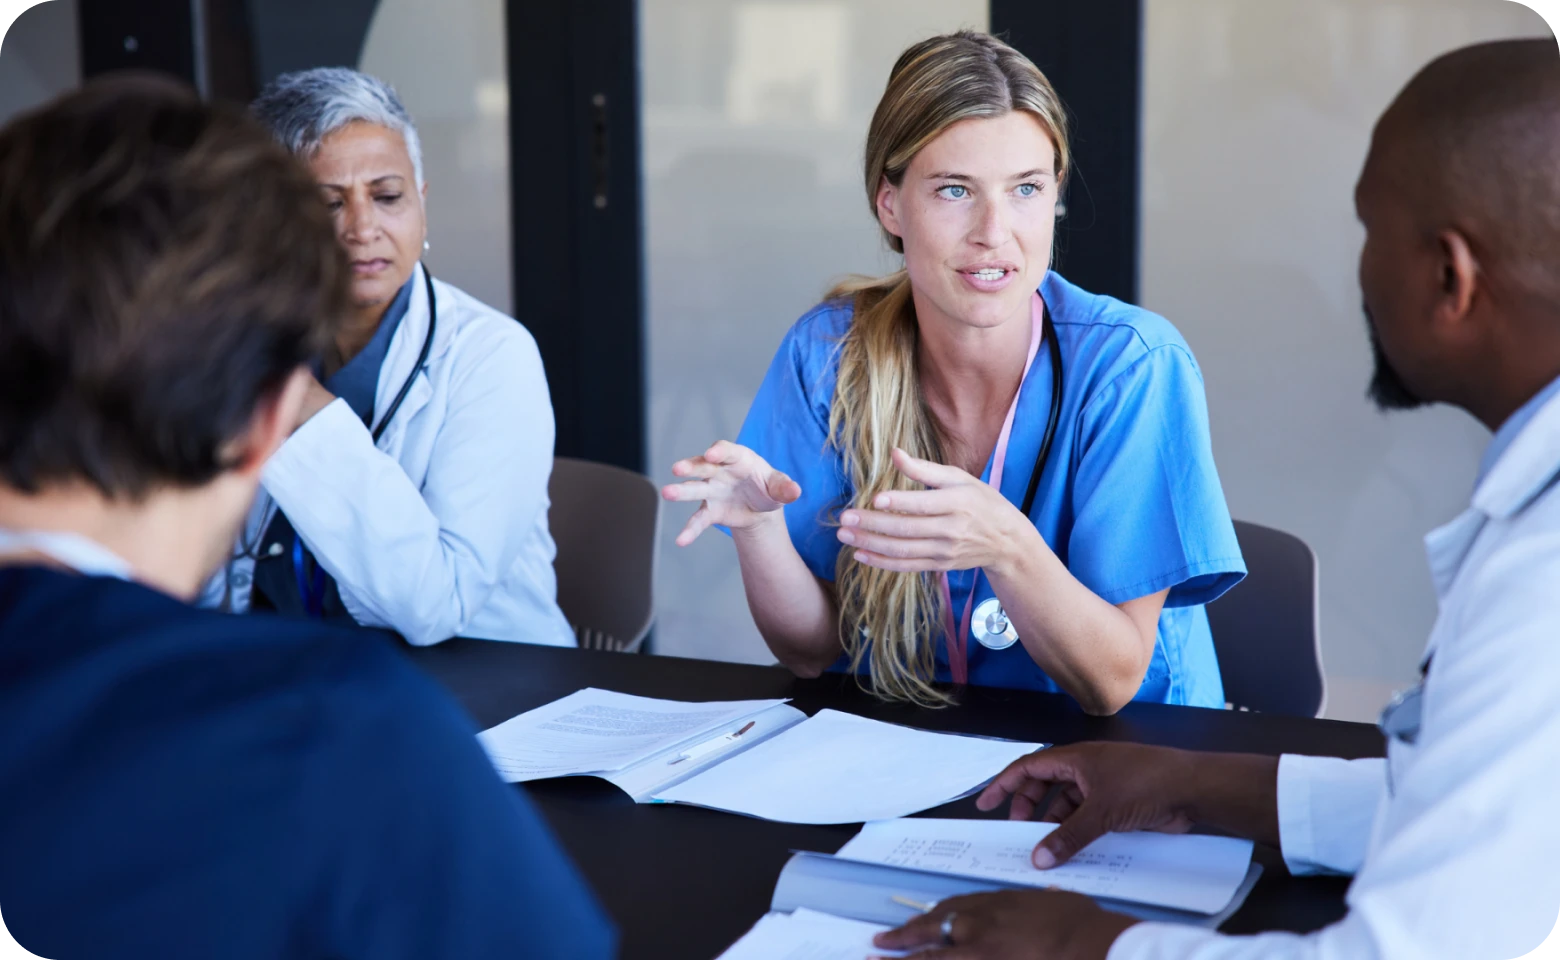 A female nurse is speaking to doctors during a healthcare team meeting.